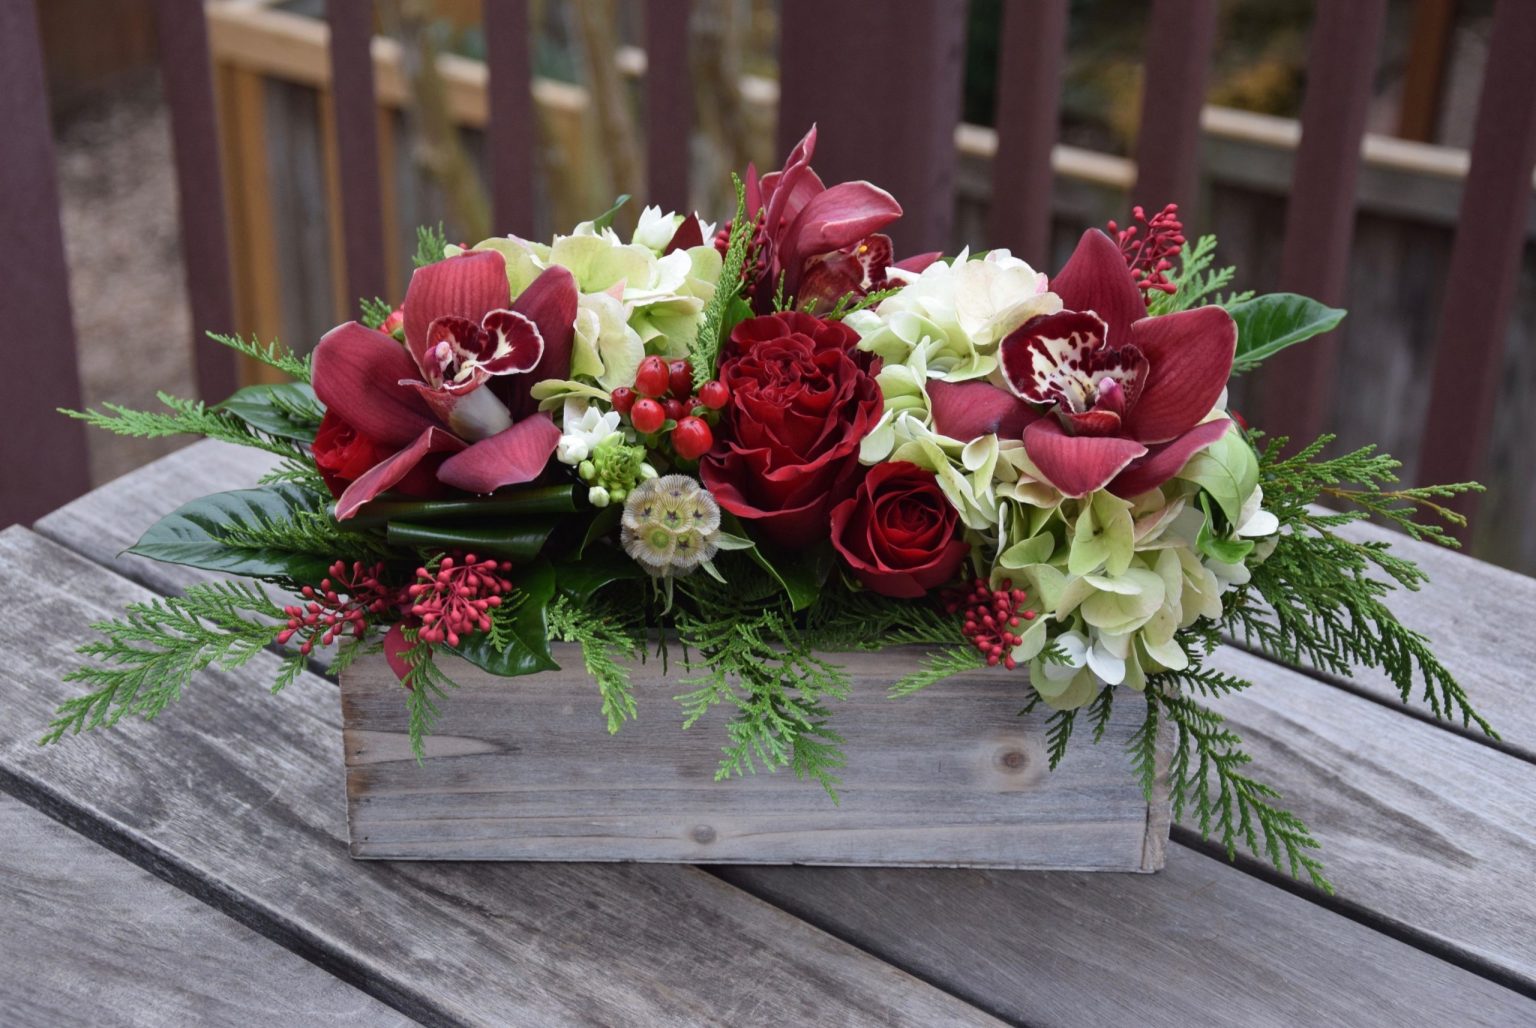 Rustic Crater For your Floral Arrangement.